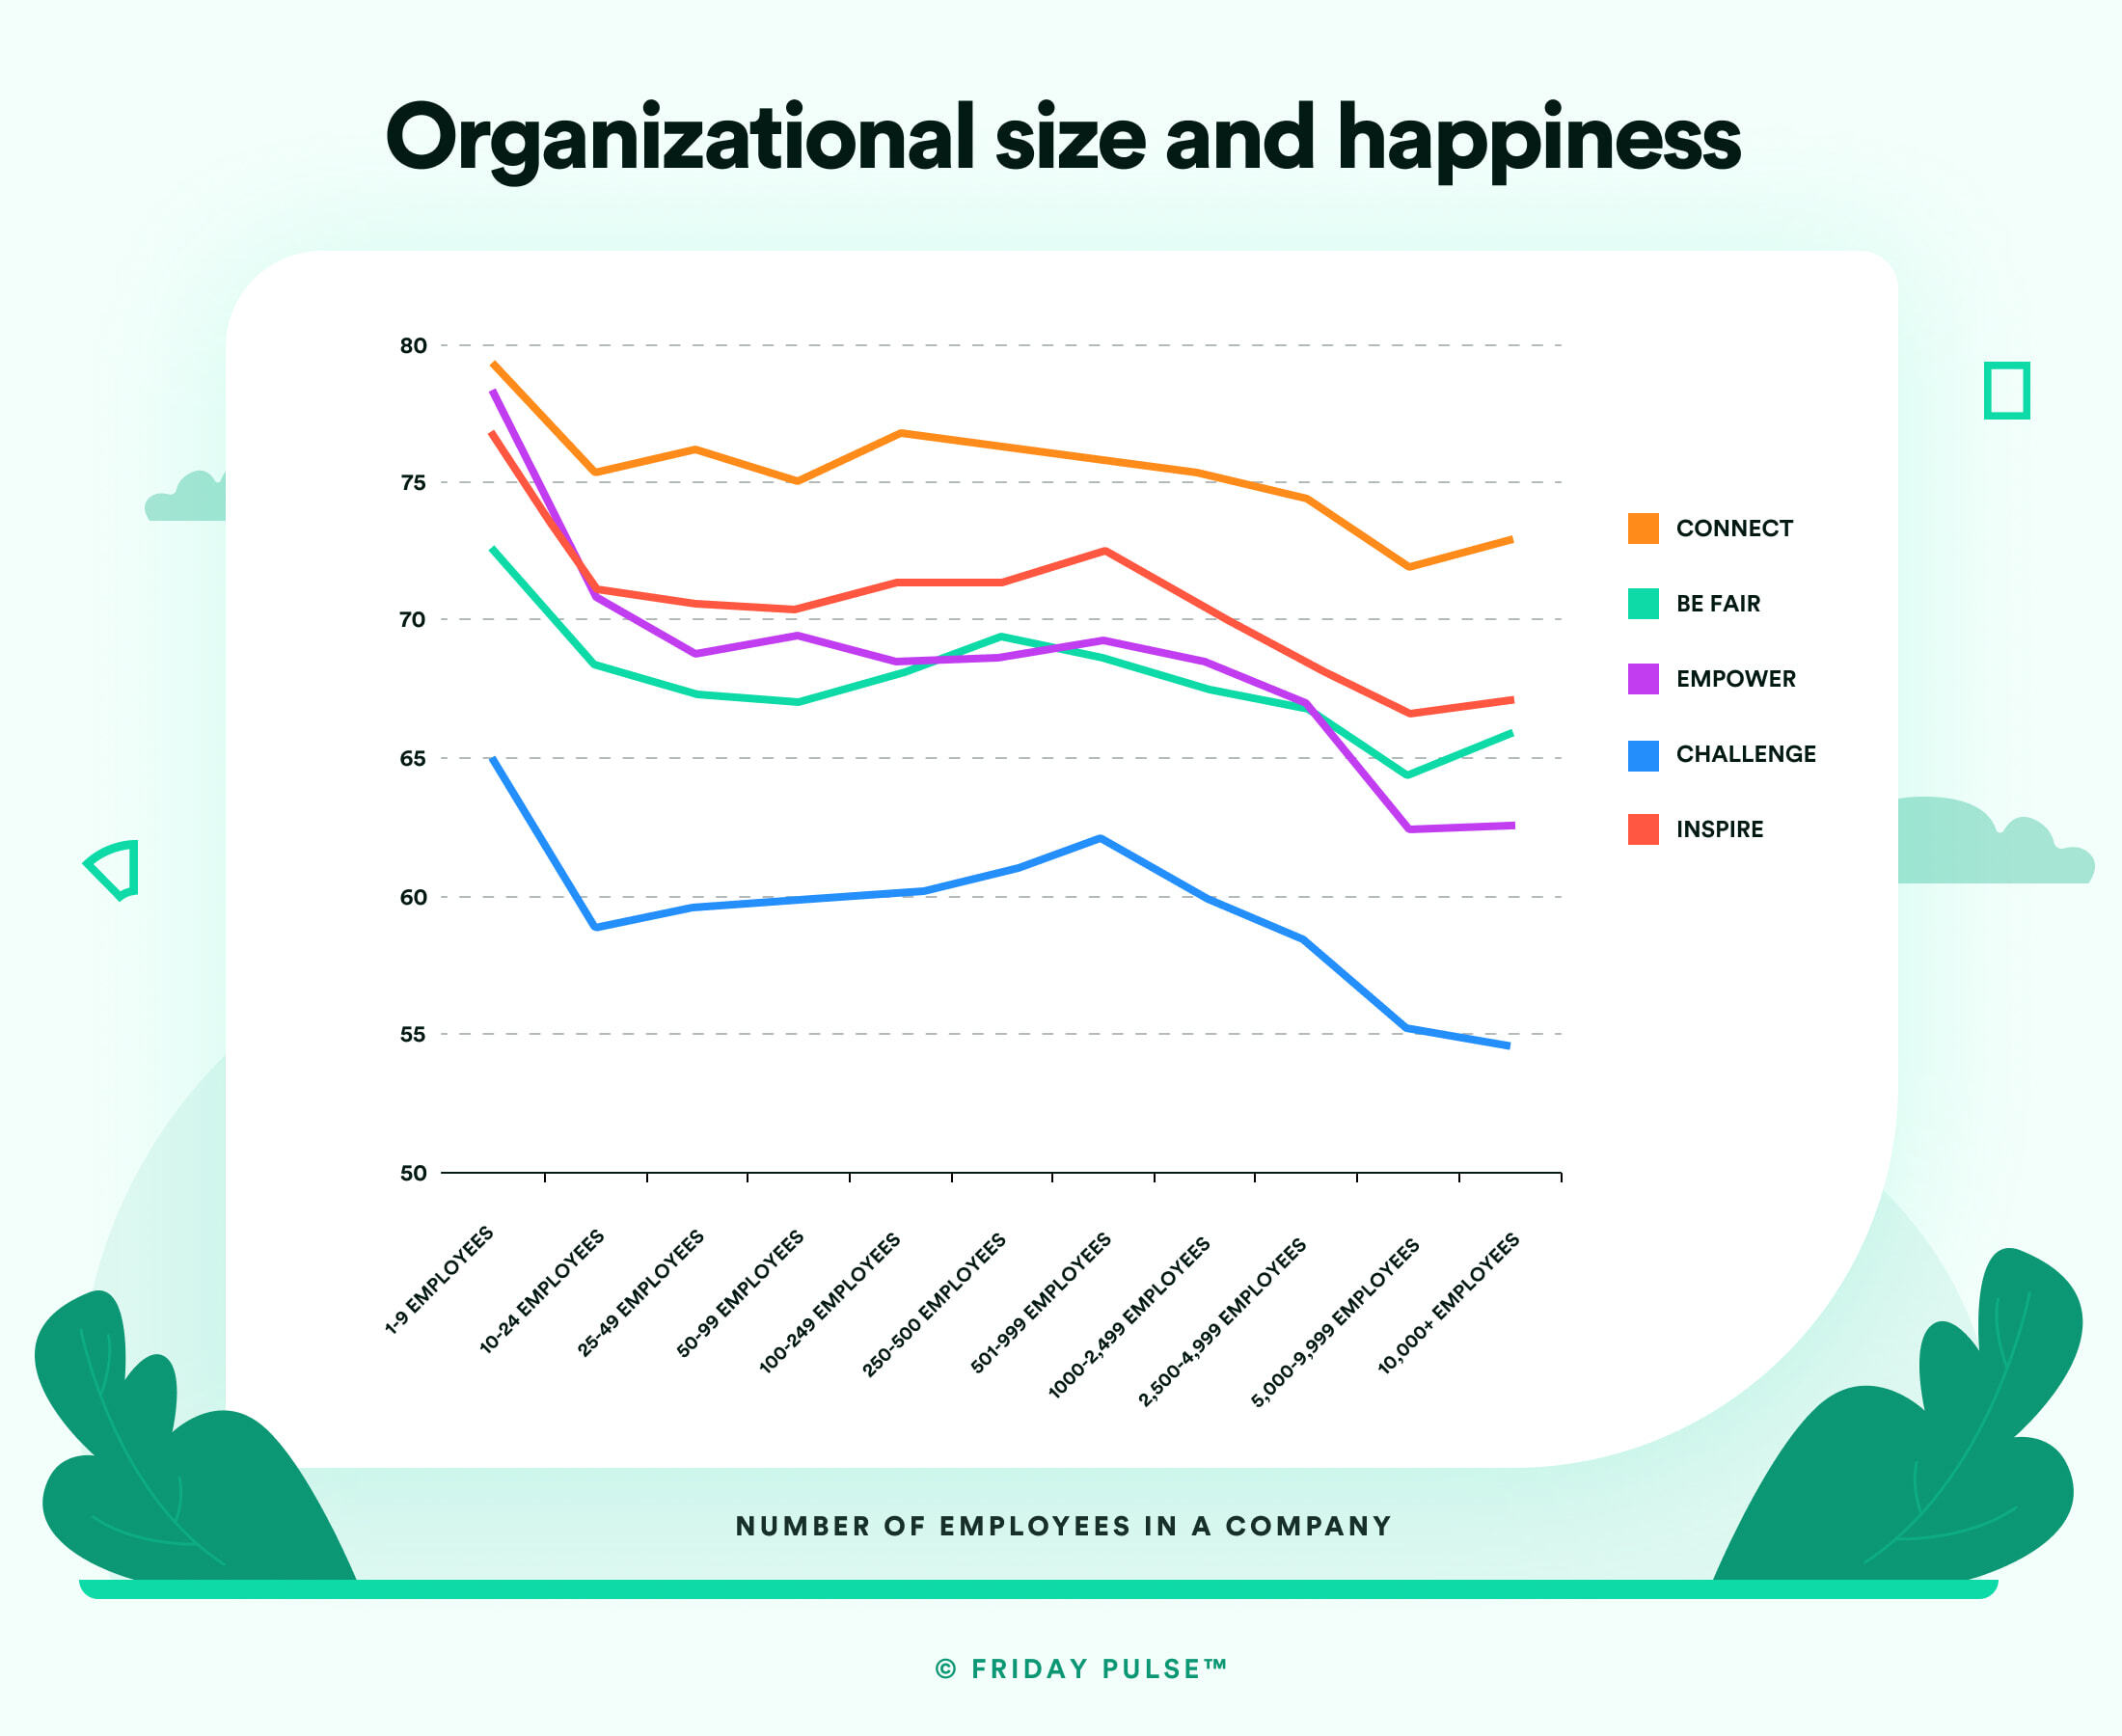 Graph tracking 5 Ways to Happiness at Work and organizational size